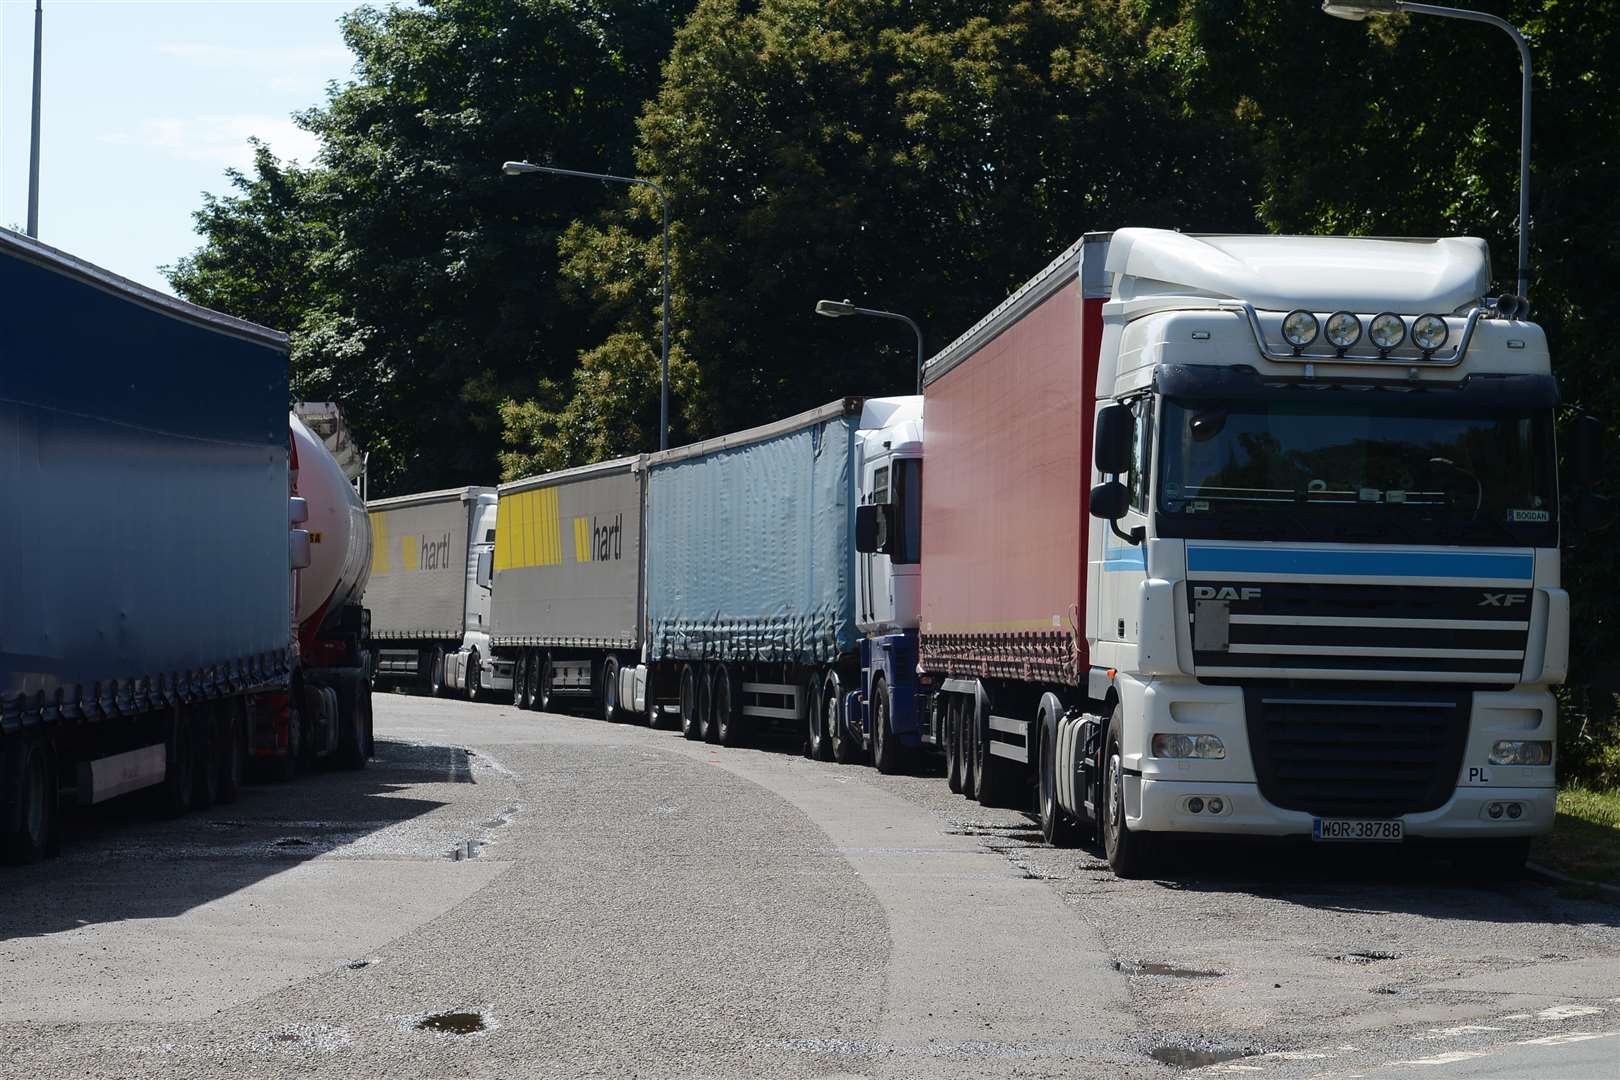 People had been seen tampering with fuel caps on HGVs. Stock image.